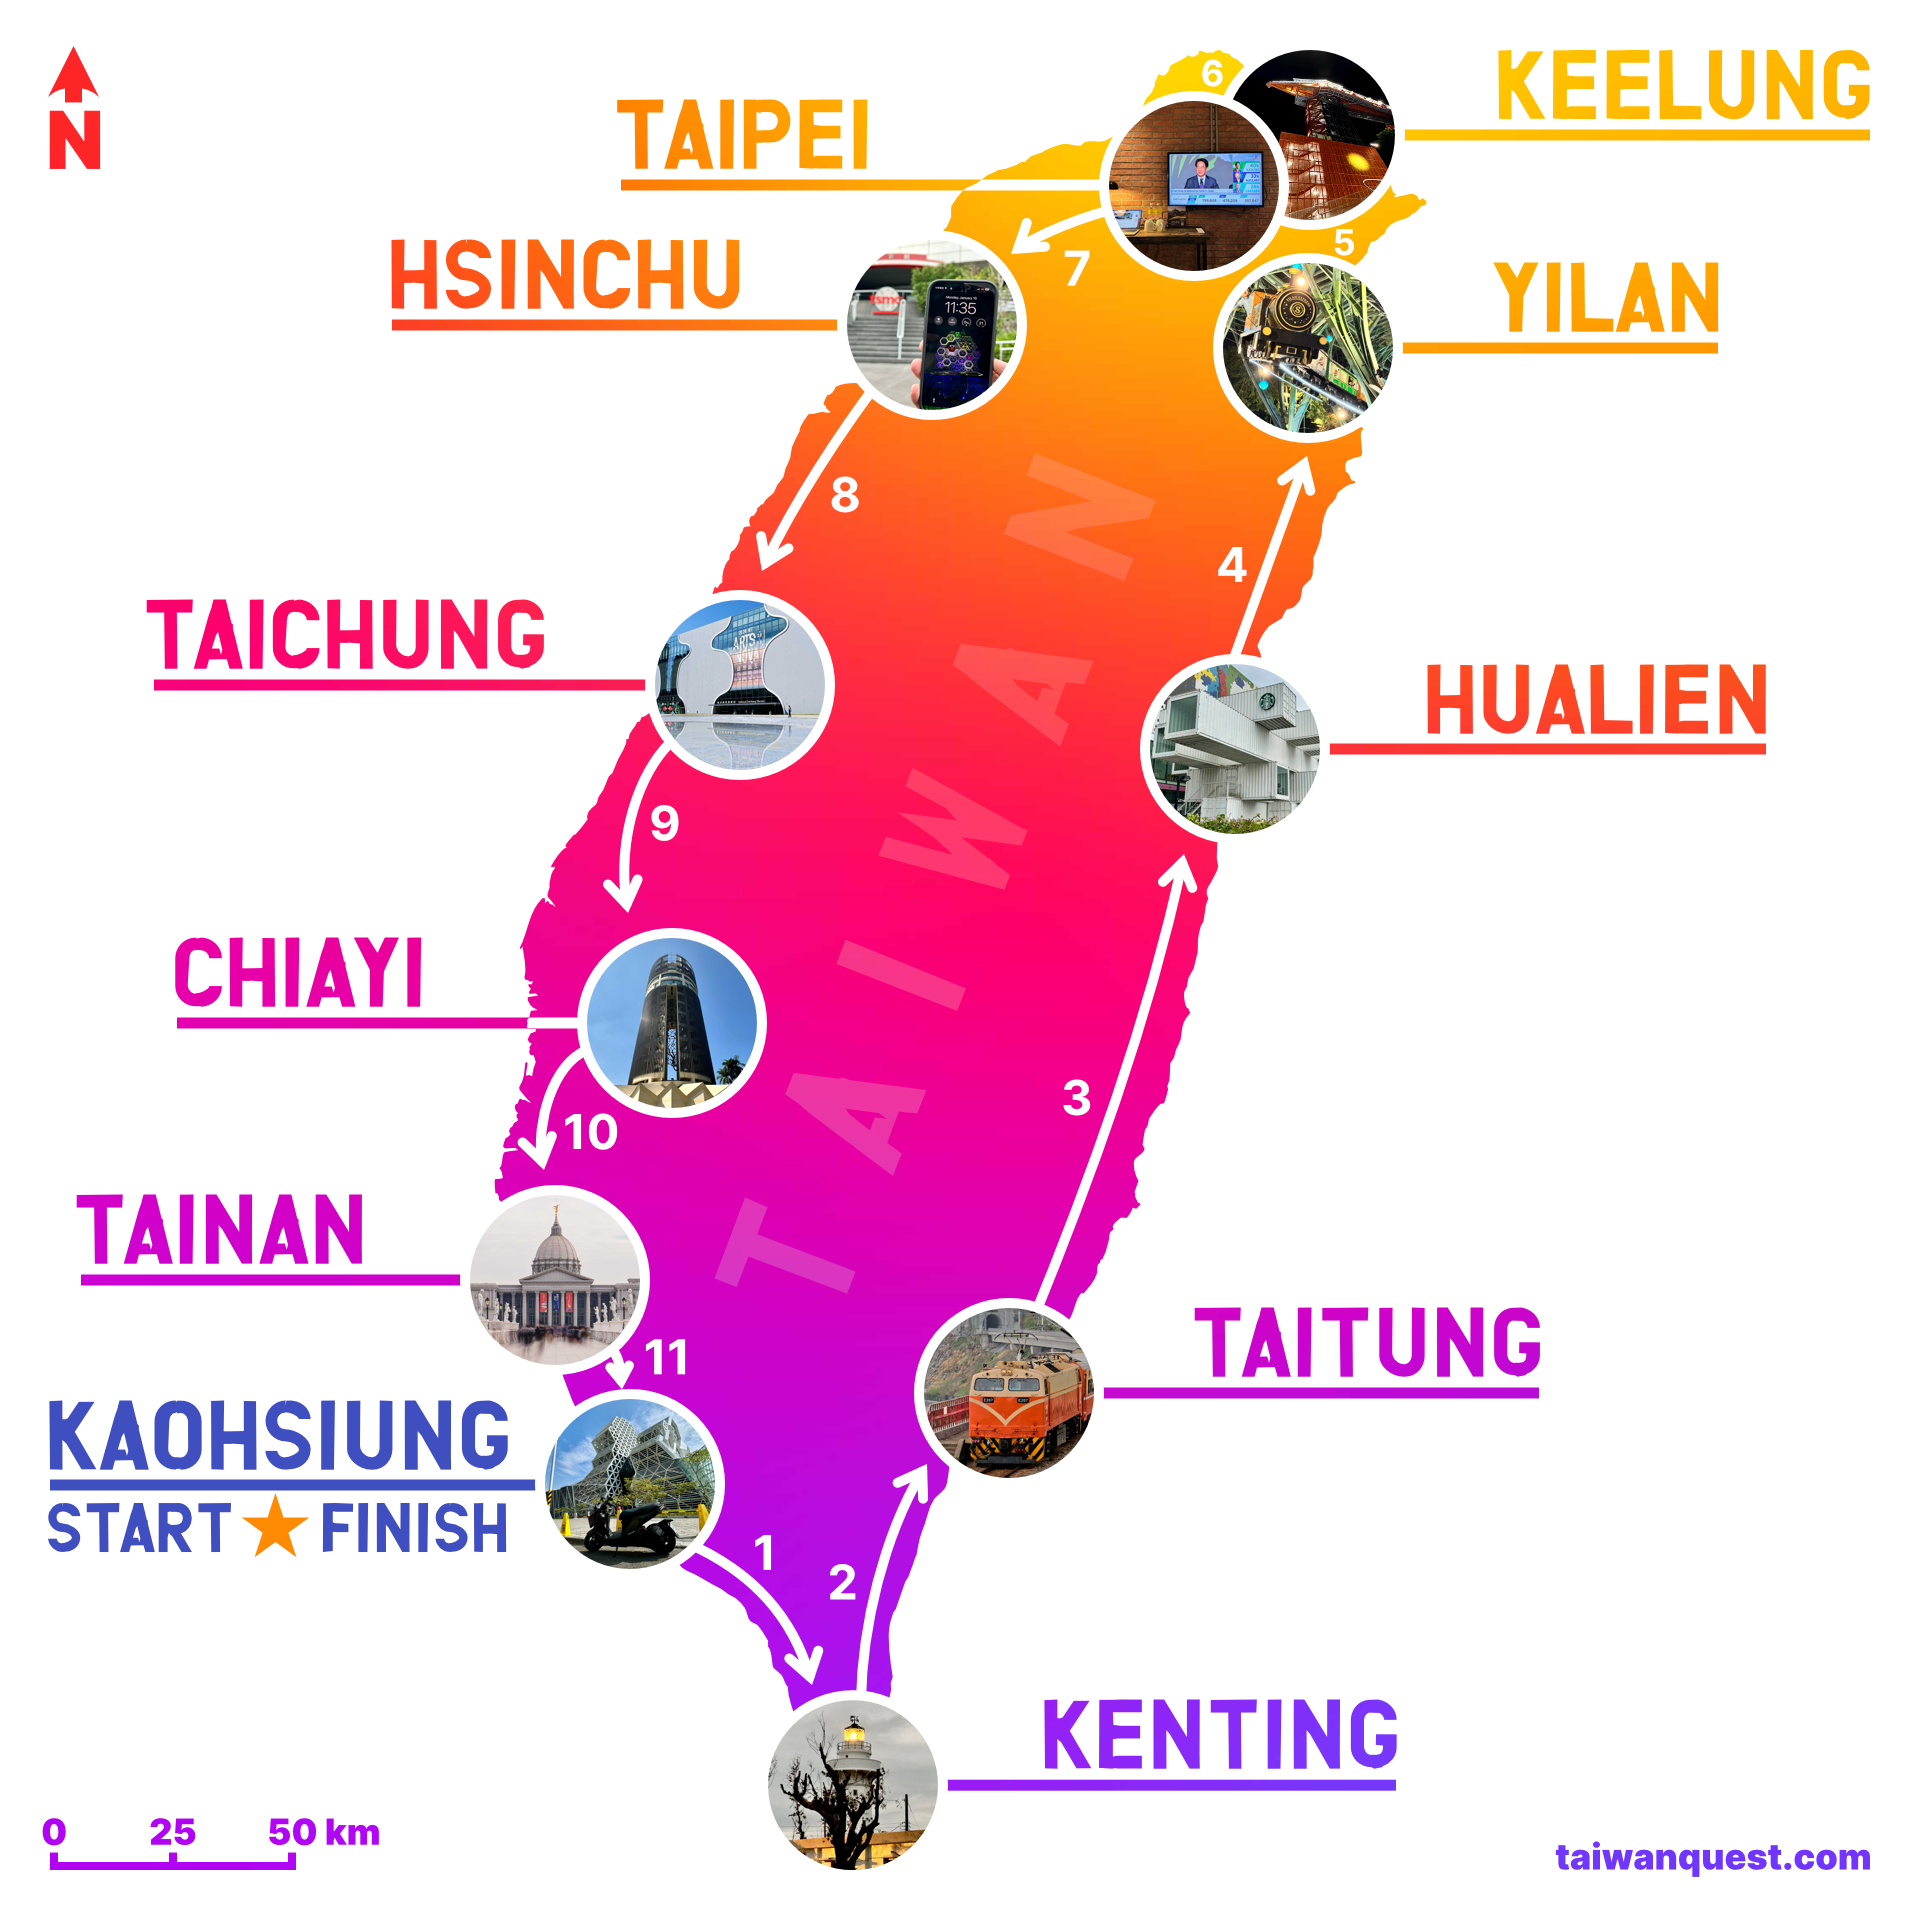 A colorful map of Taiwan with the following locations marked: Day 1, Kenting. Day 2, Taitung. Day 3, Hualien. Day 4, Yilan. Day 5, Keelung. Day 6, Taipei. Day 7, Hsinchu. Day 8, Taichung. Day 9, Chiayi. Day 10, Tainan. Day 11, Kaohsiung.